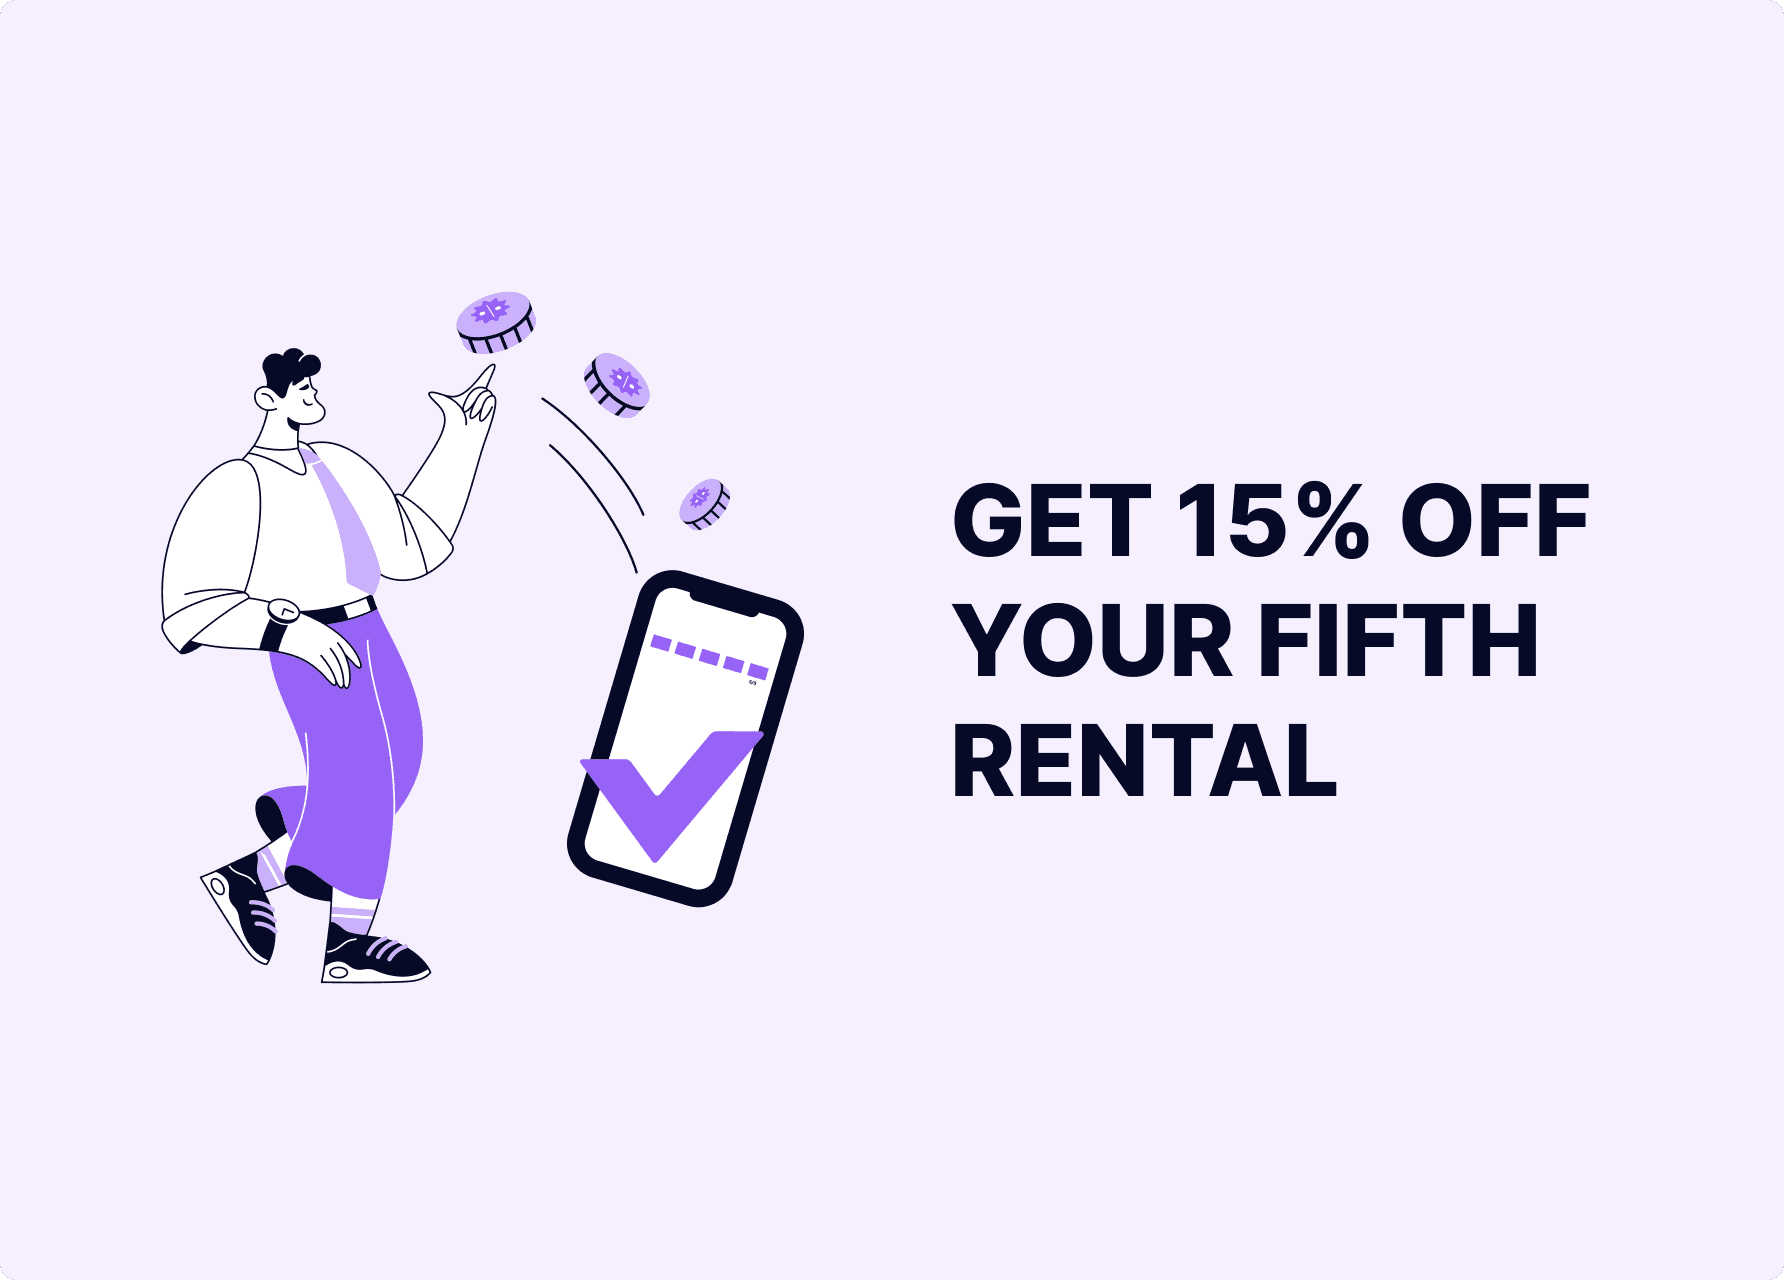 After four rentals, your fifth rental is 15% off&nbsp;😎